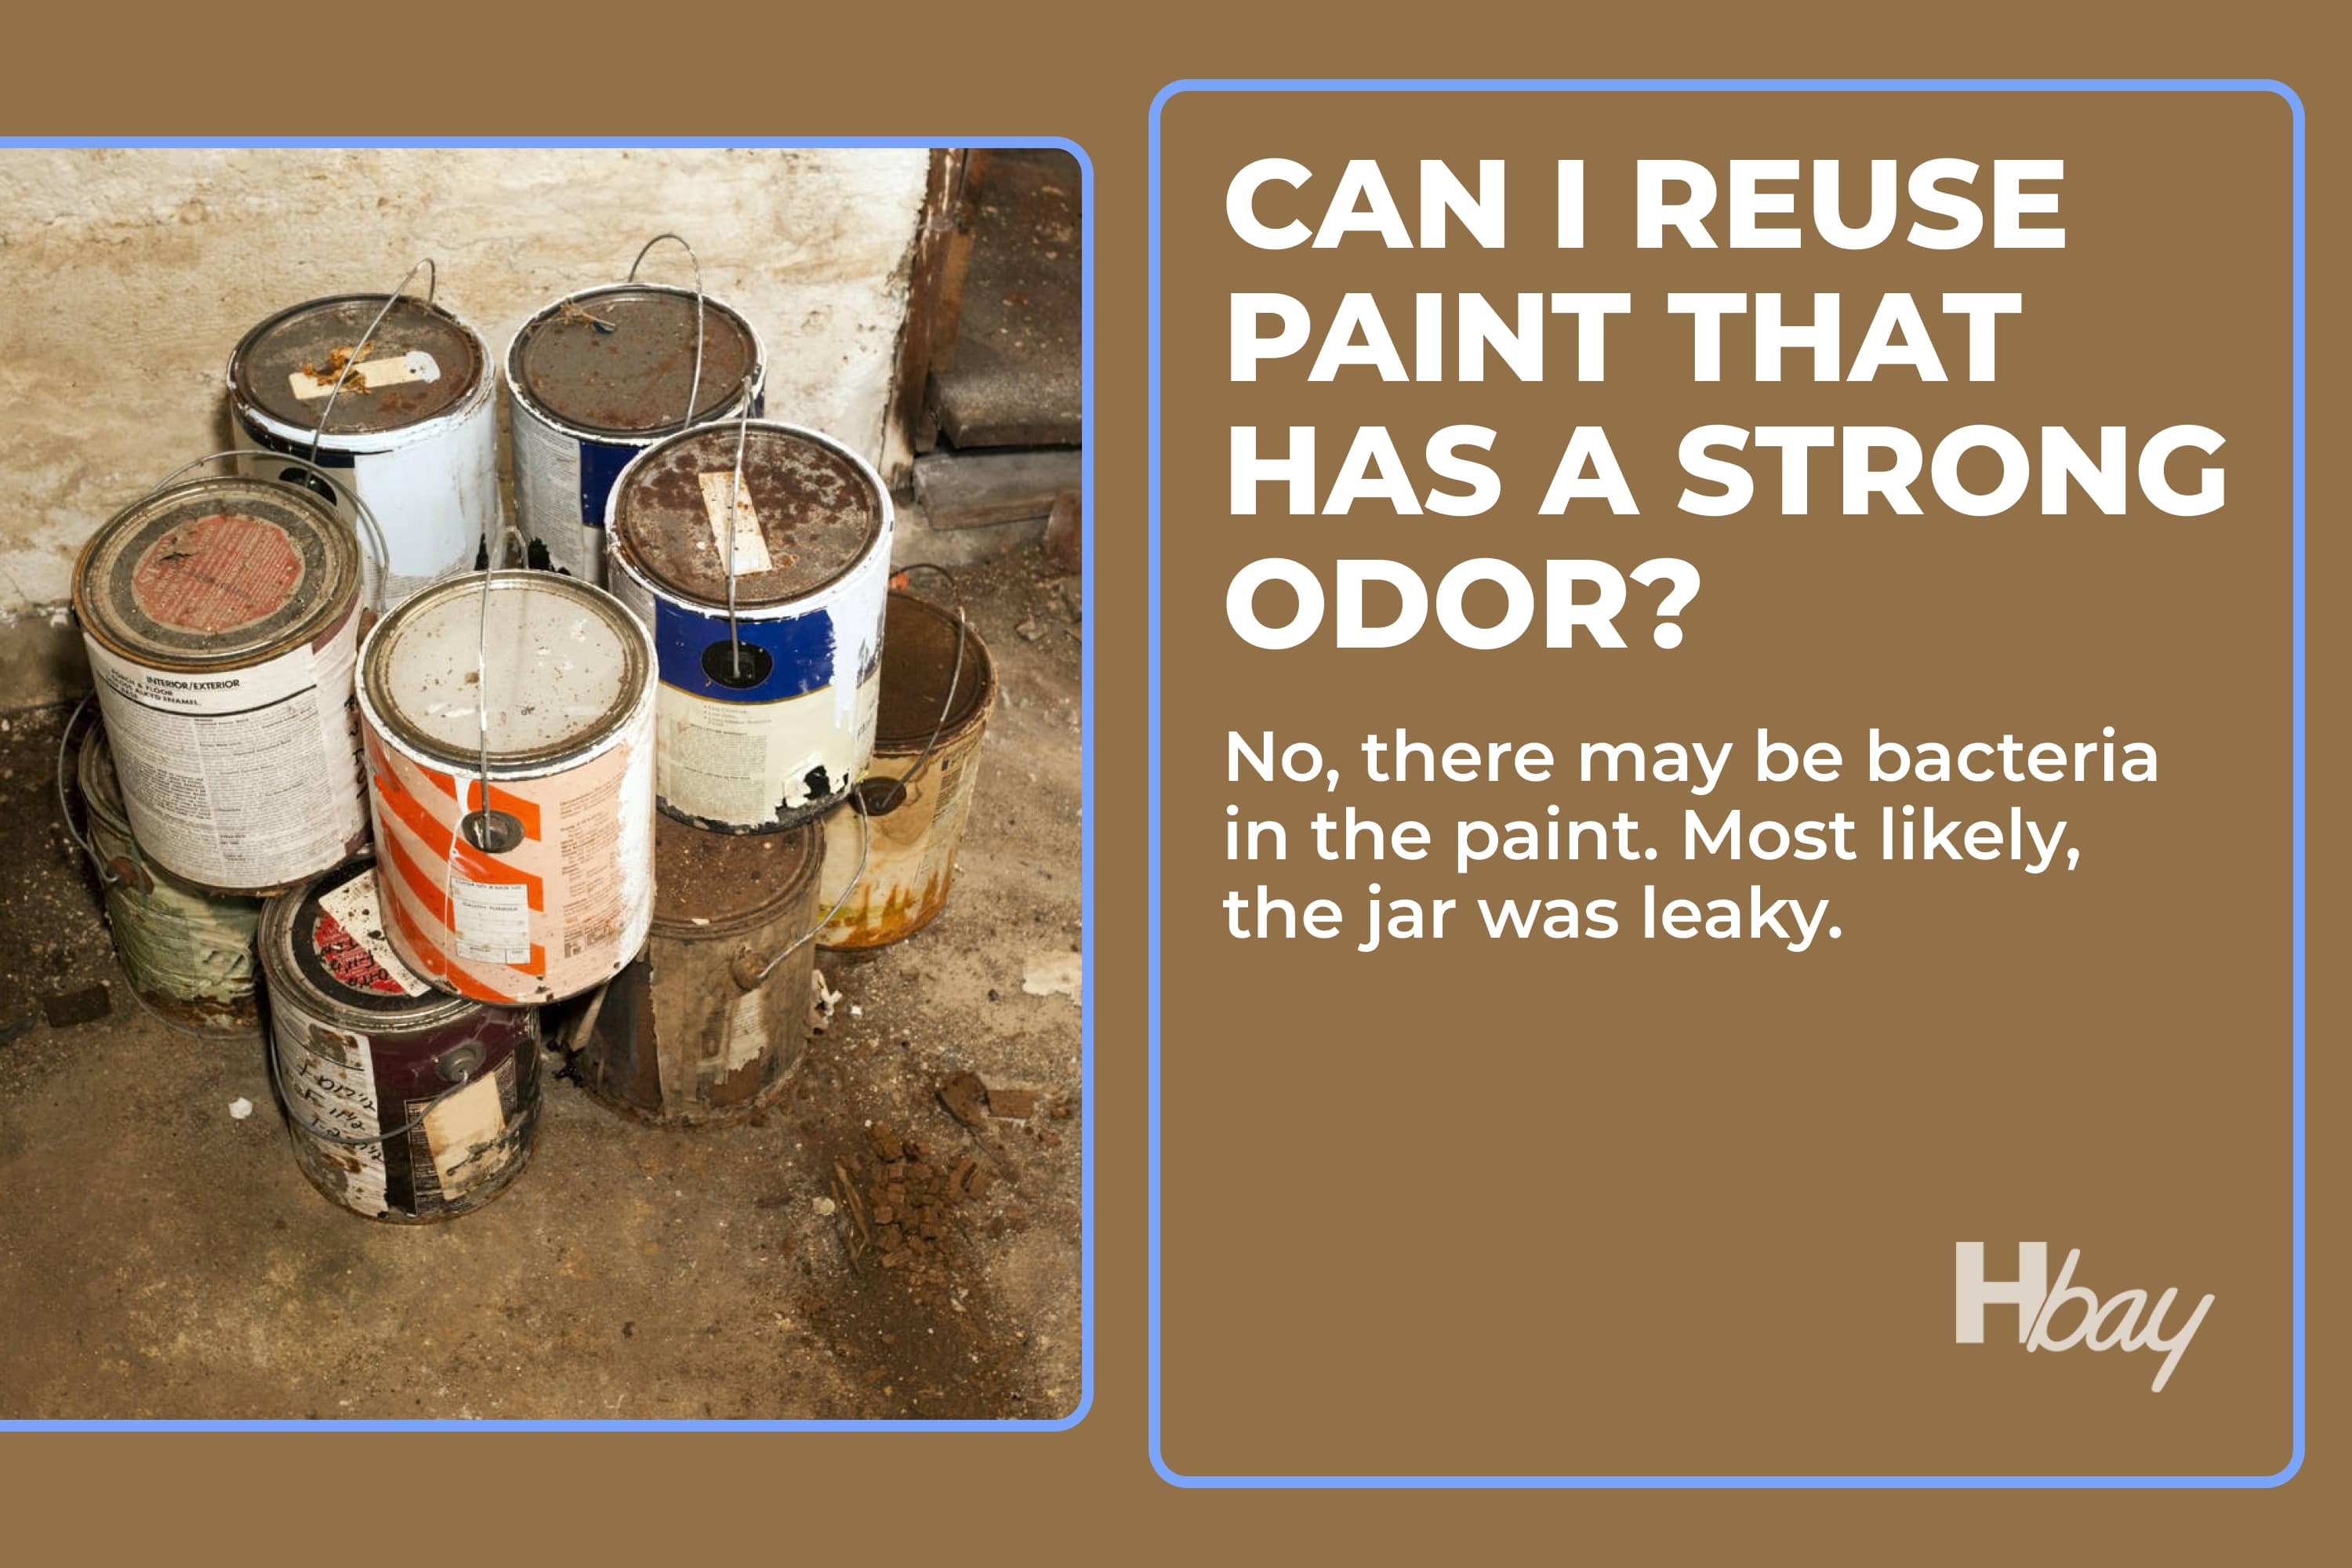 Can I reuse paint that has a strong odor